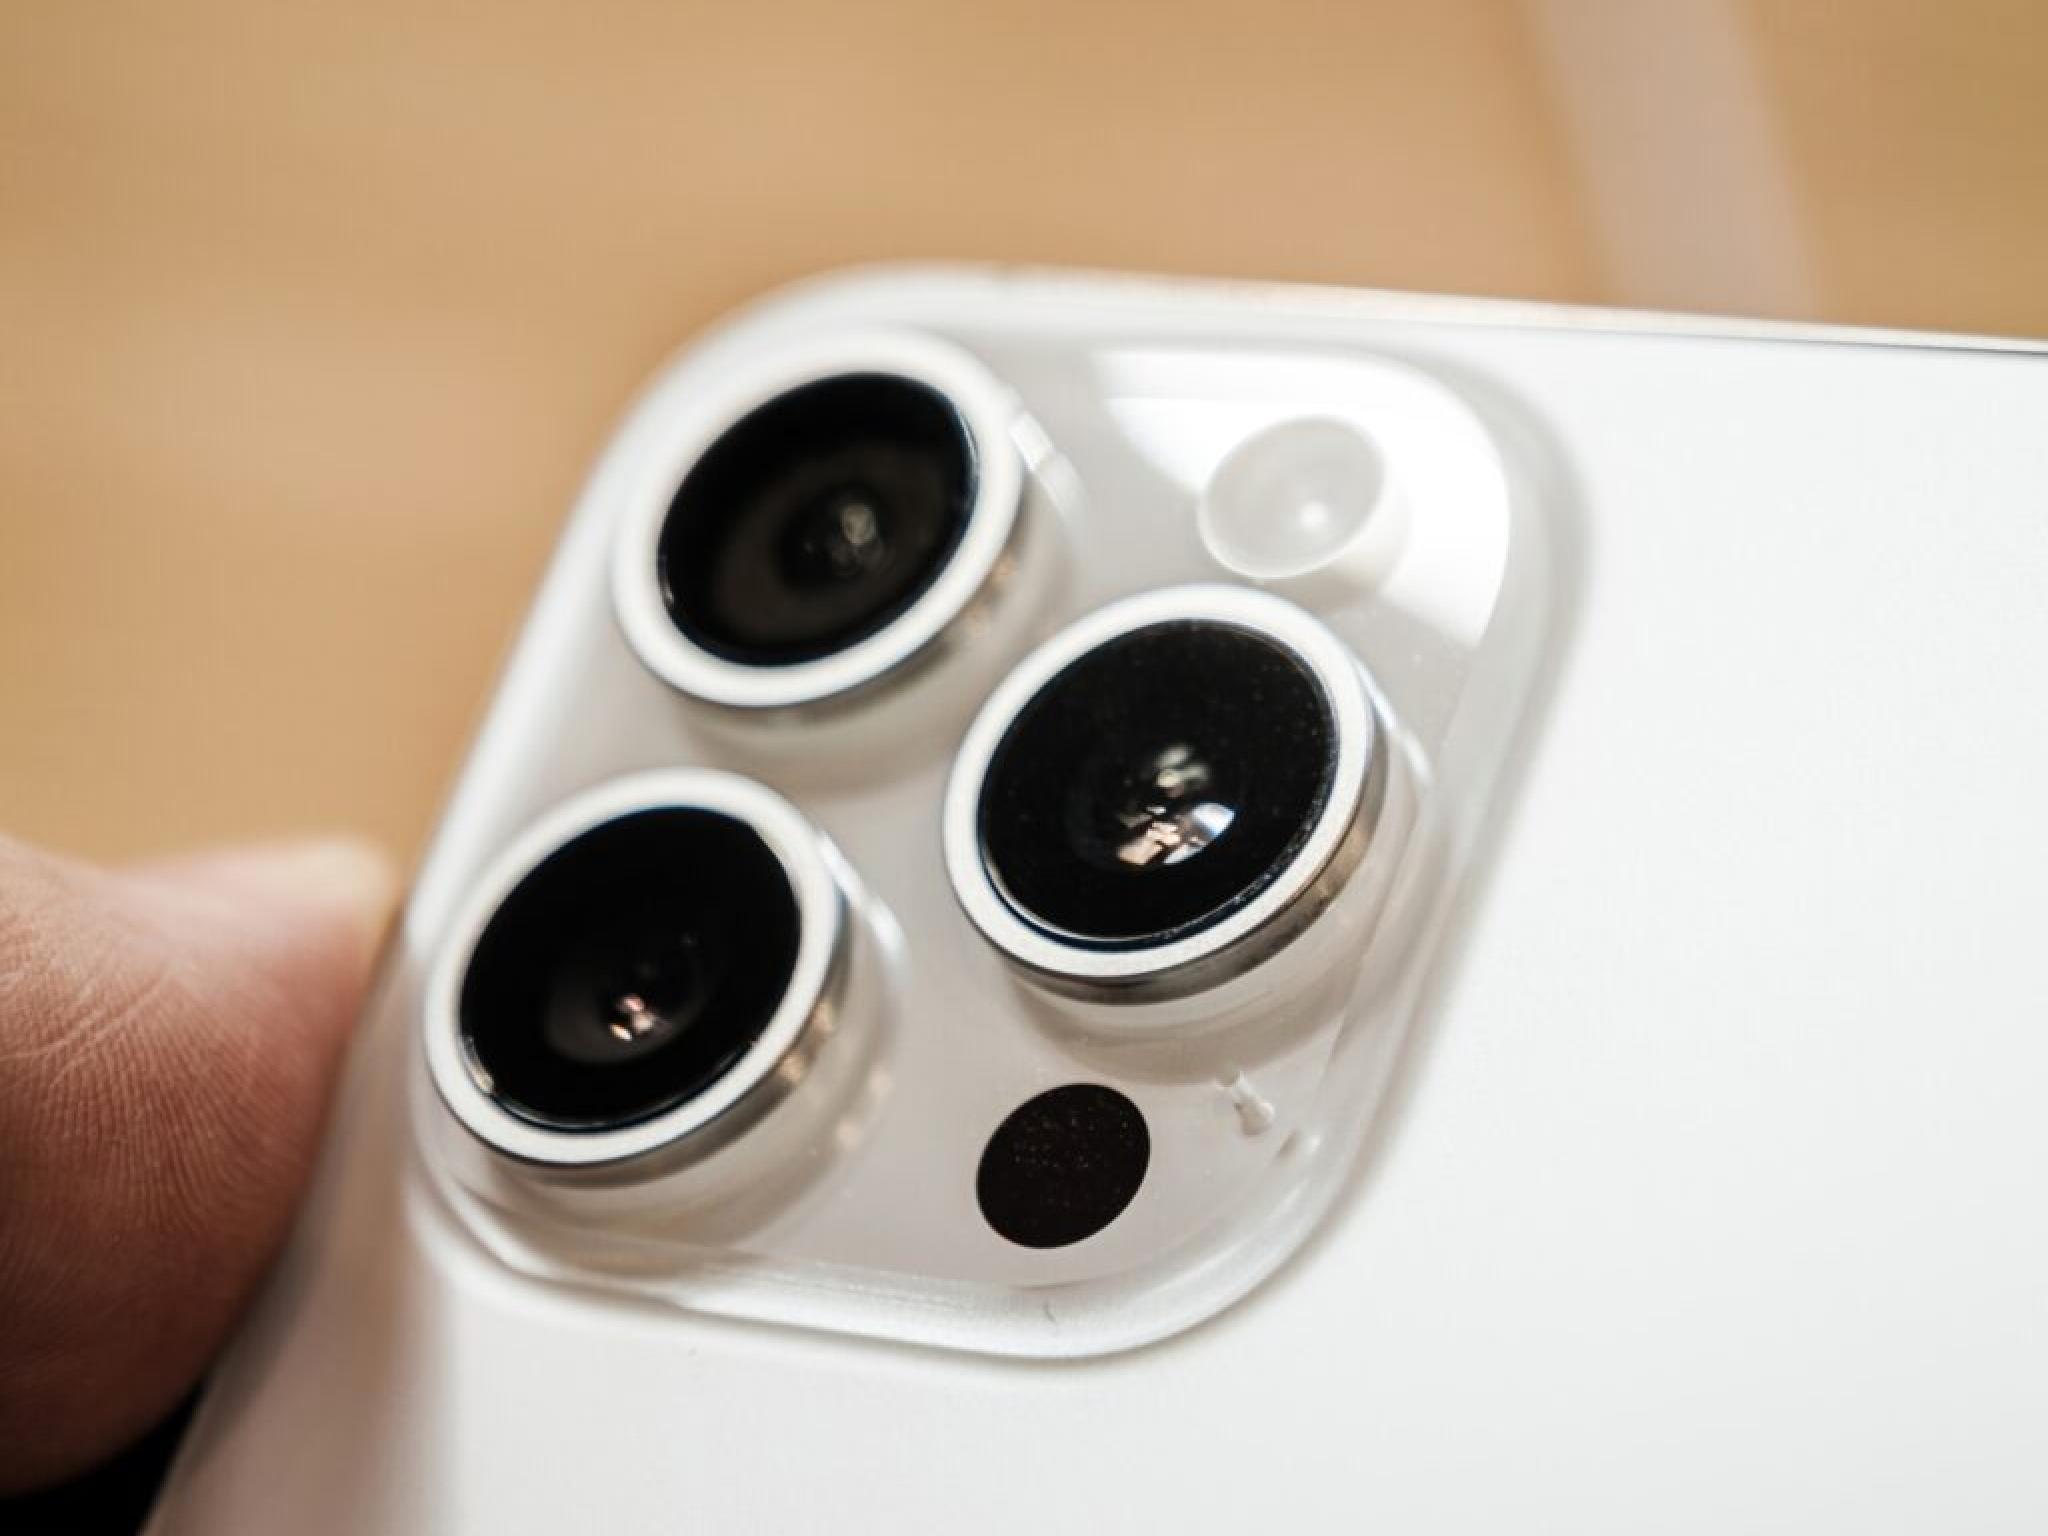  top-apple-analyst-says-dont-expect-much-for-iphone-16-this-year-but-tim-cook-led-company-has-a-slew-of-tetraprism-camera-upgrades-in-pipeline 